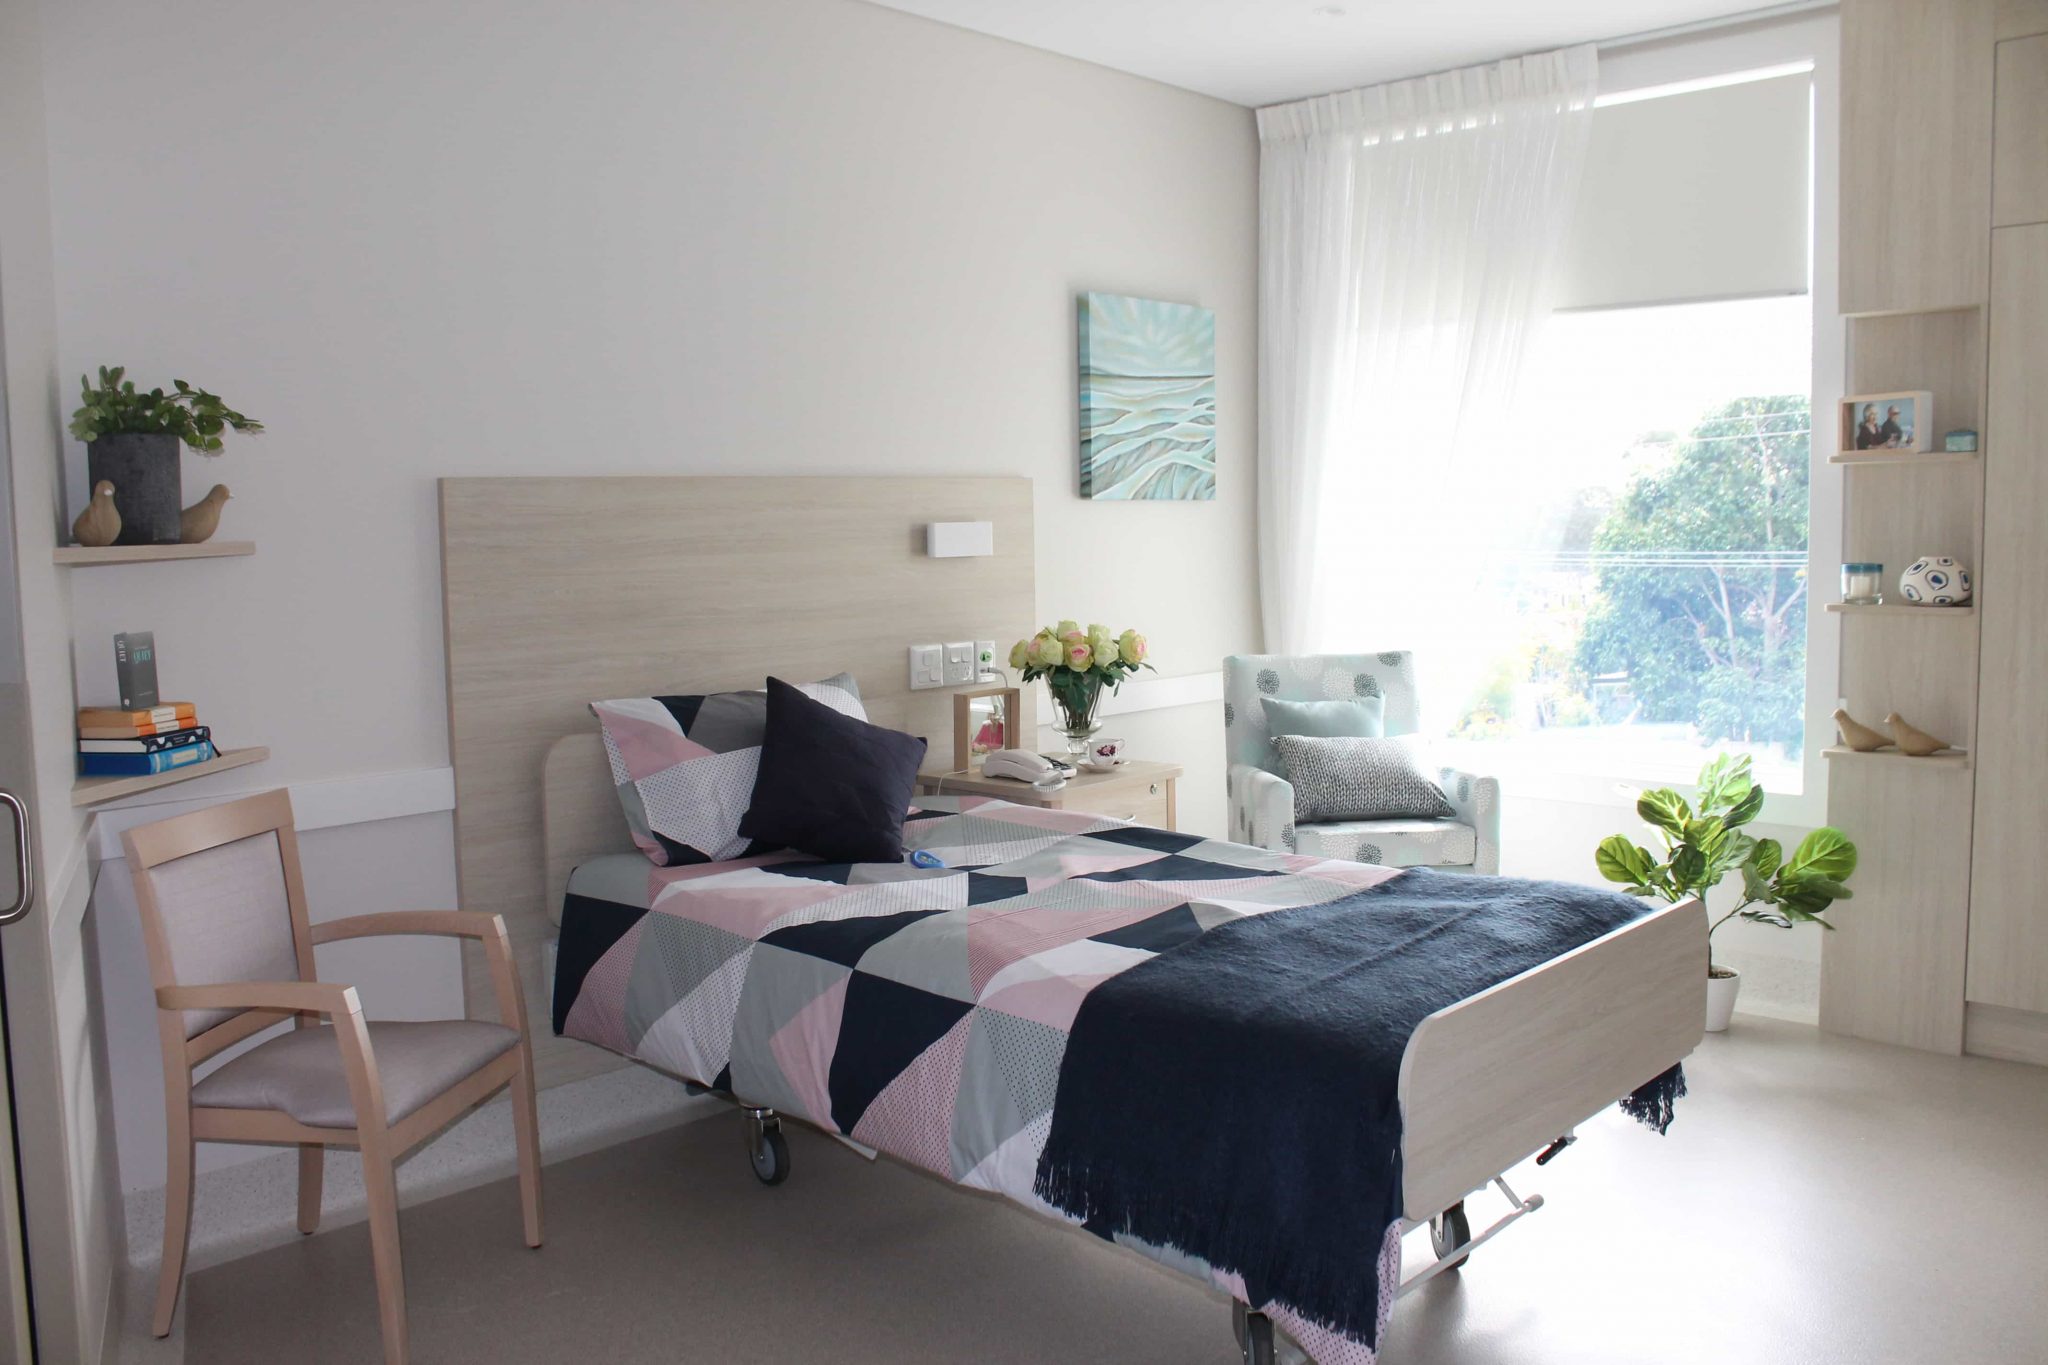 A modern, light-filled bedroom at the Sir David Martin Home inside Whiddon Easton Park, an aged care home in Glenfield.